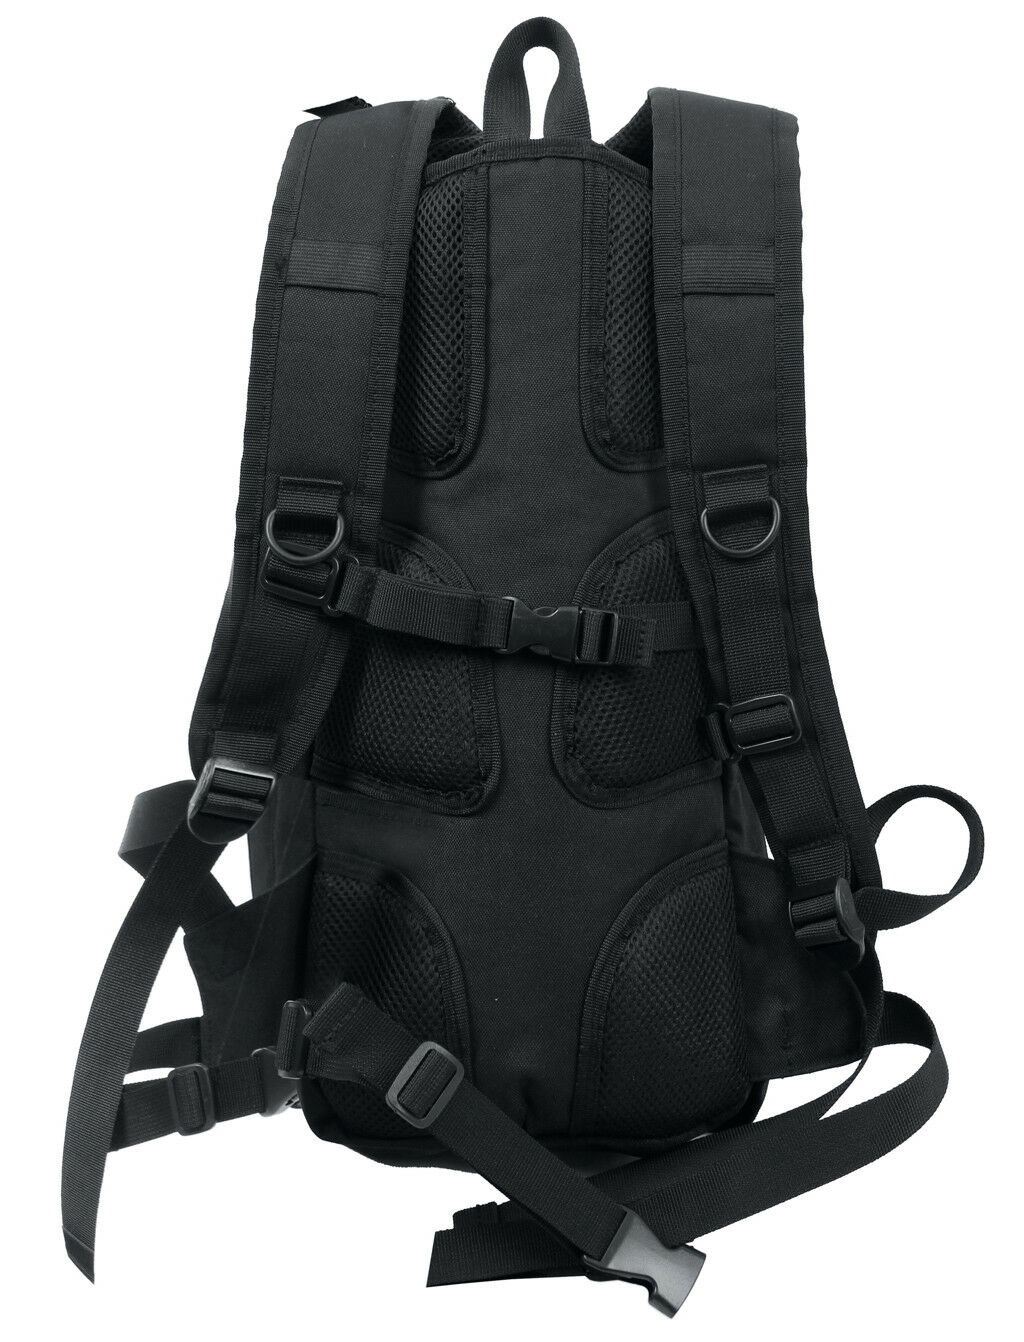 Rothco MOLLE Quickstrike Tactical Hydration Backpack (No Bladder)